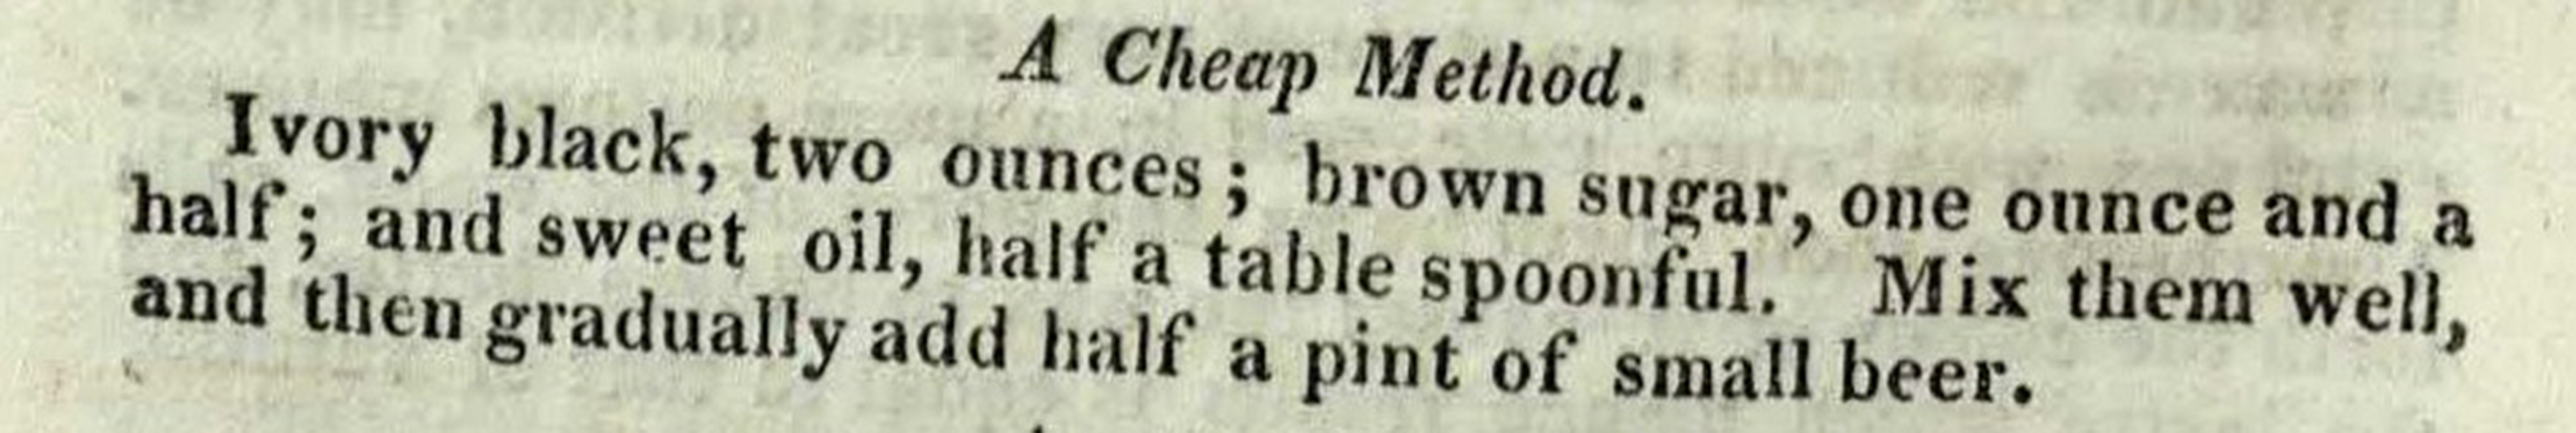 The cheap receipt for blacking, containing small beer. The Complete Servant, p. 390 (St Andrews copy sTX331.A2).